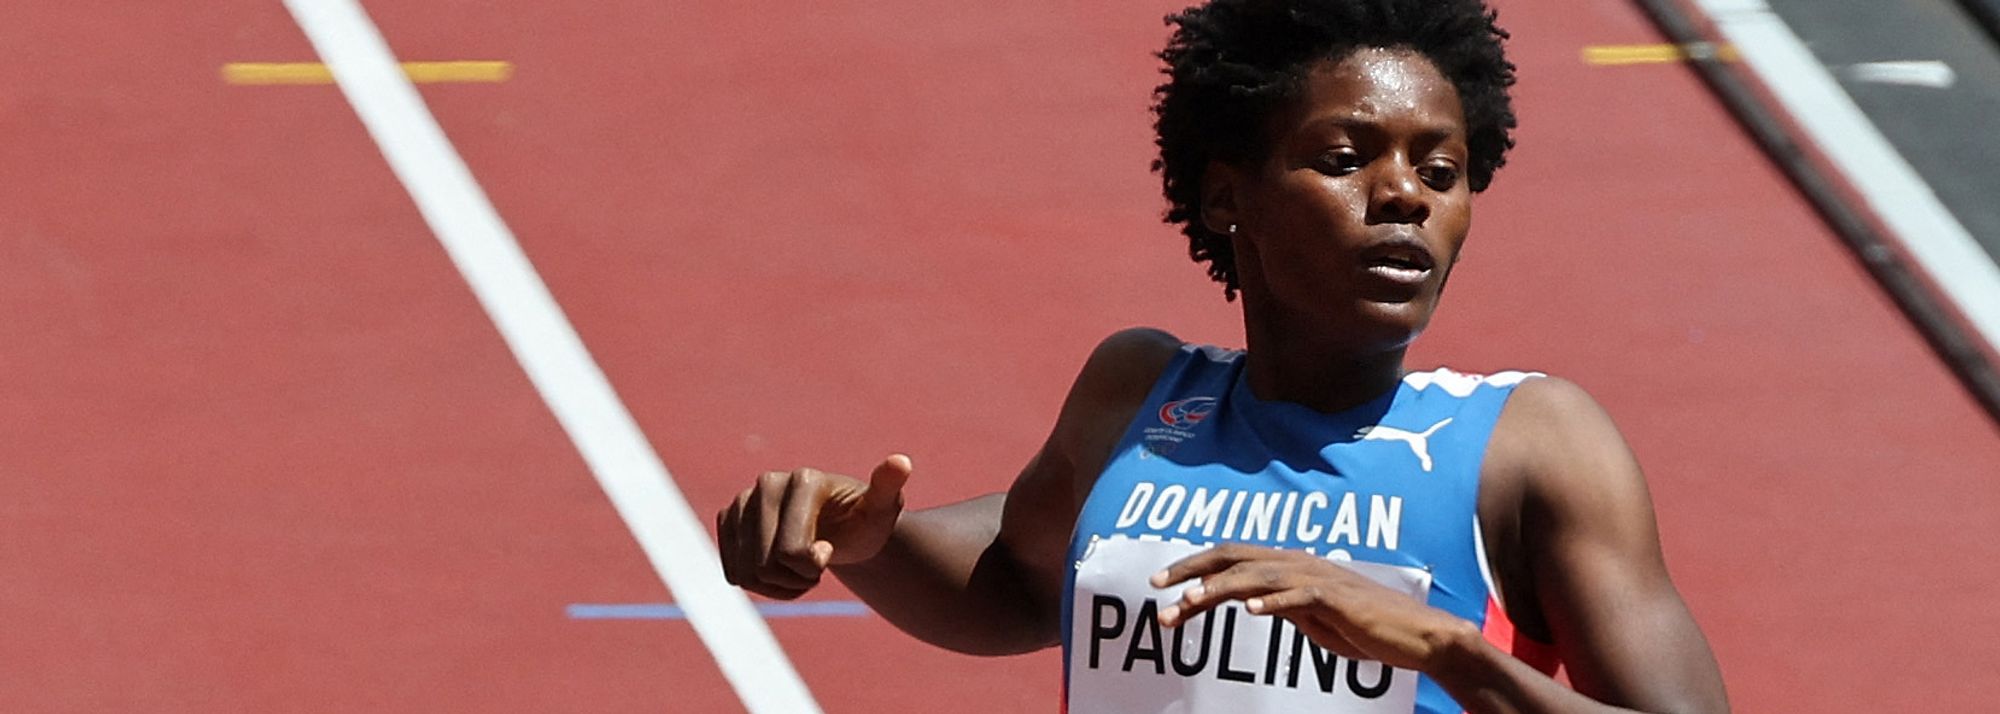 The remarkable rise of the one-lap sprinter from the Dominican Republic